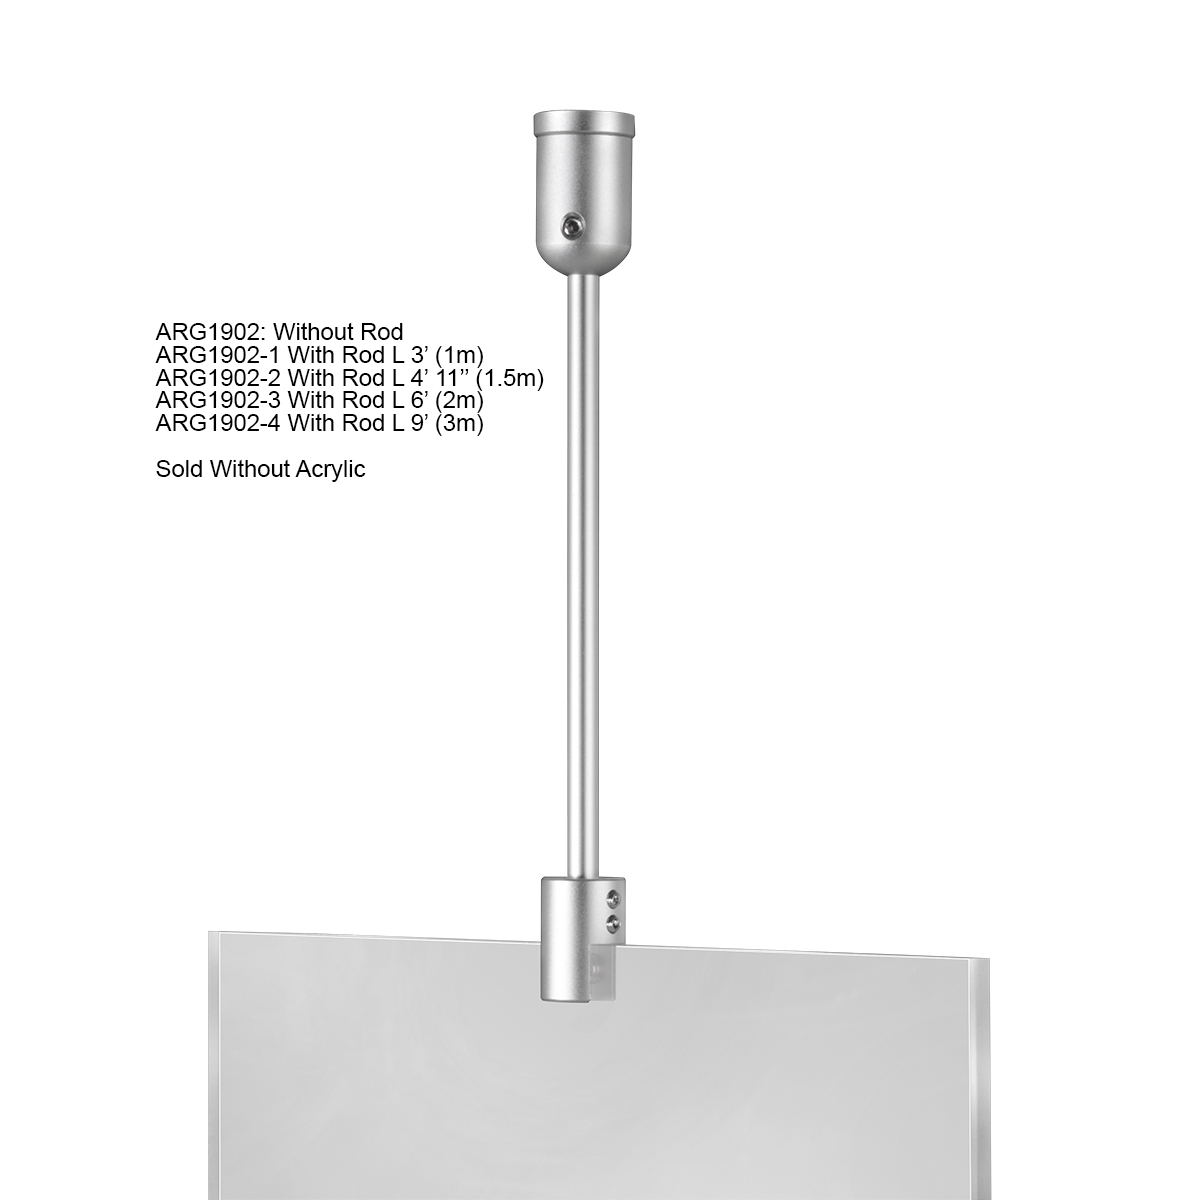 Ceiling Suspended 1/4'' Diameter Rod Kit - 1 x 3' (36'') Length - Clear Anodized Aluminum Finish